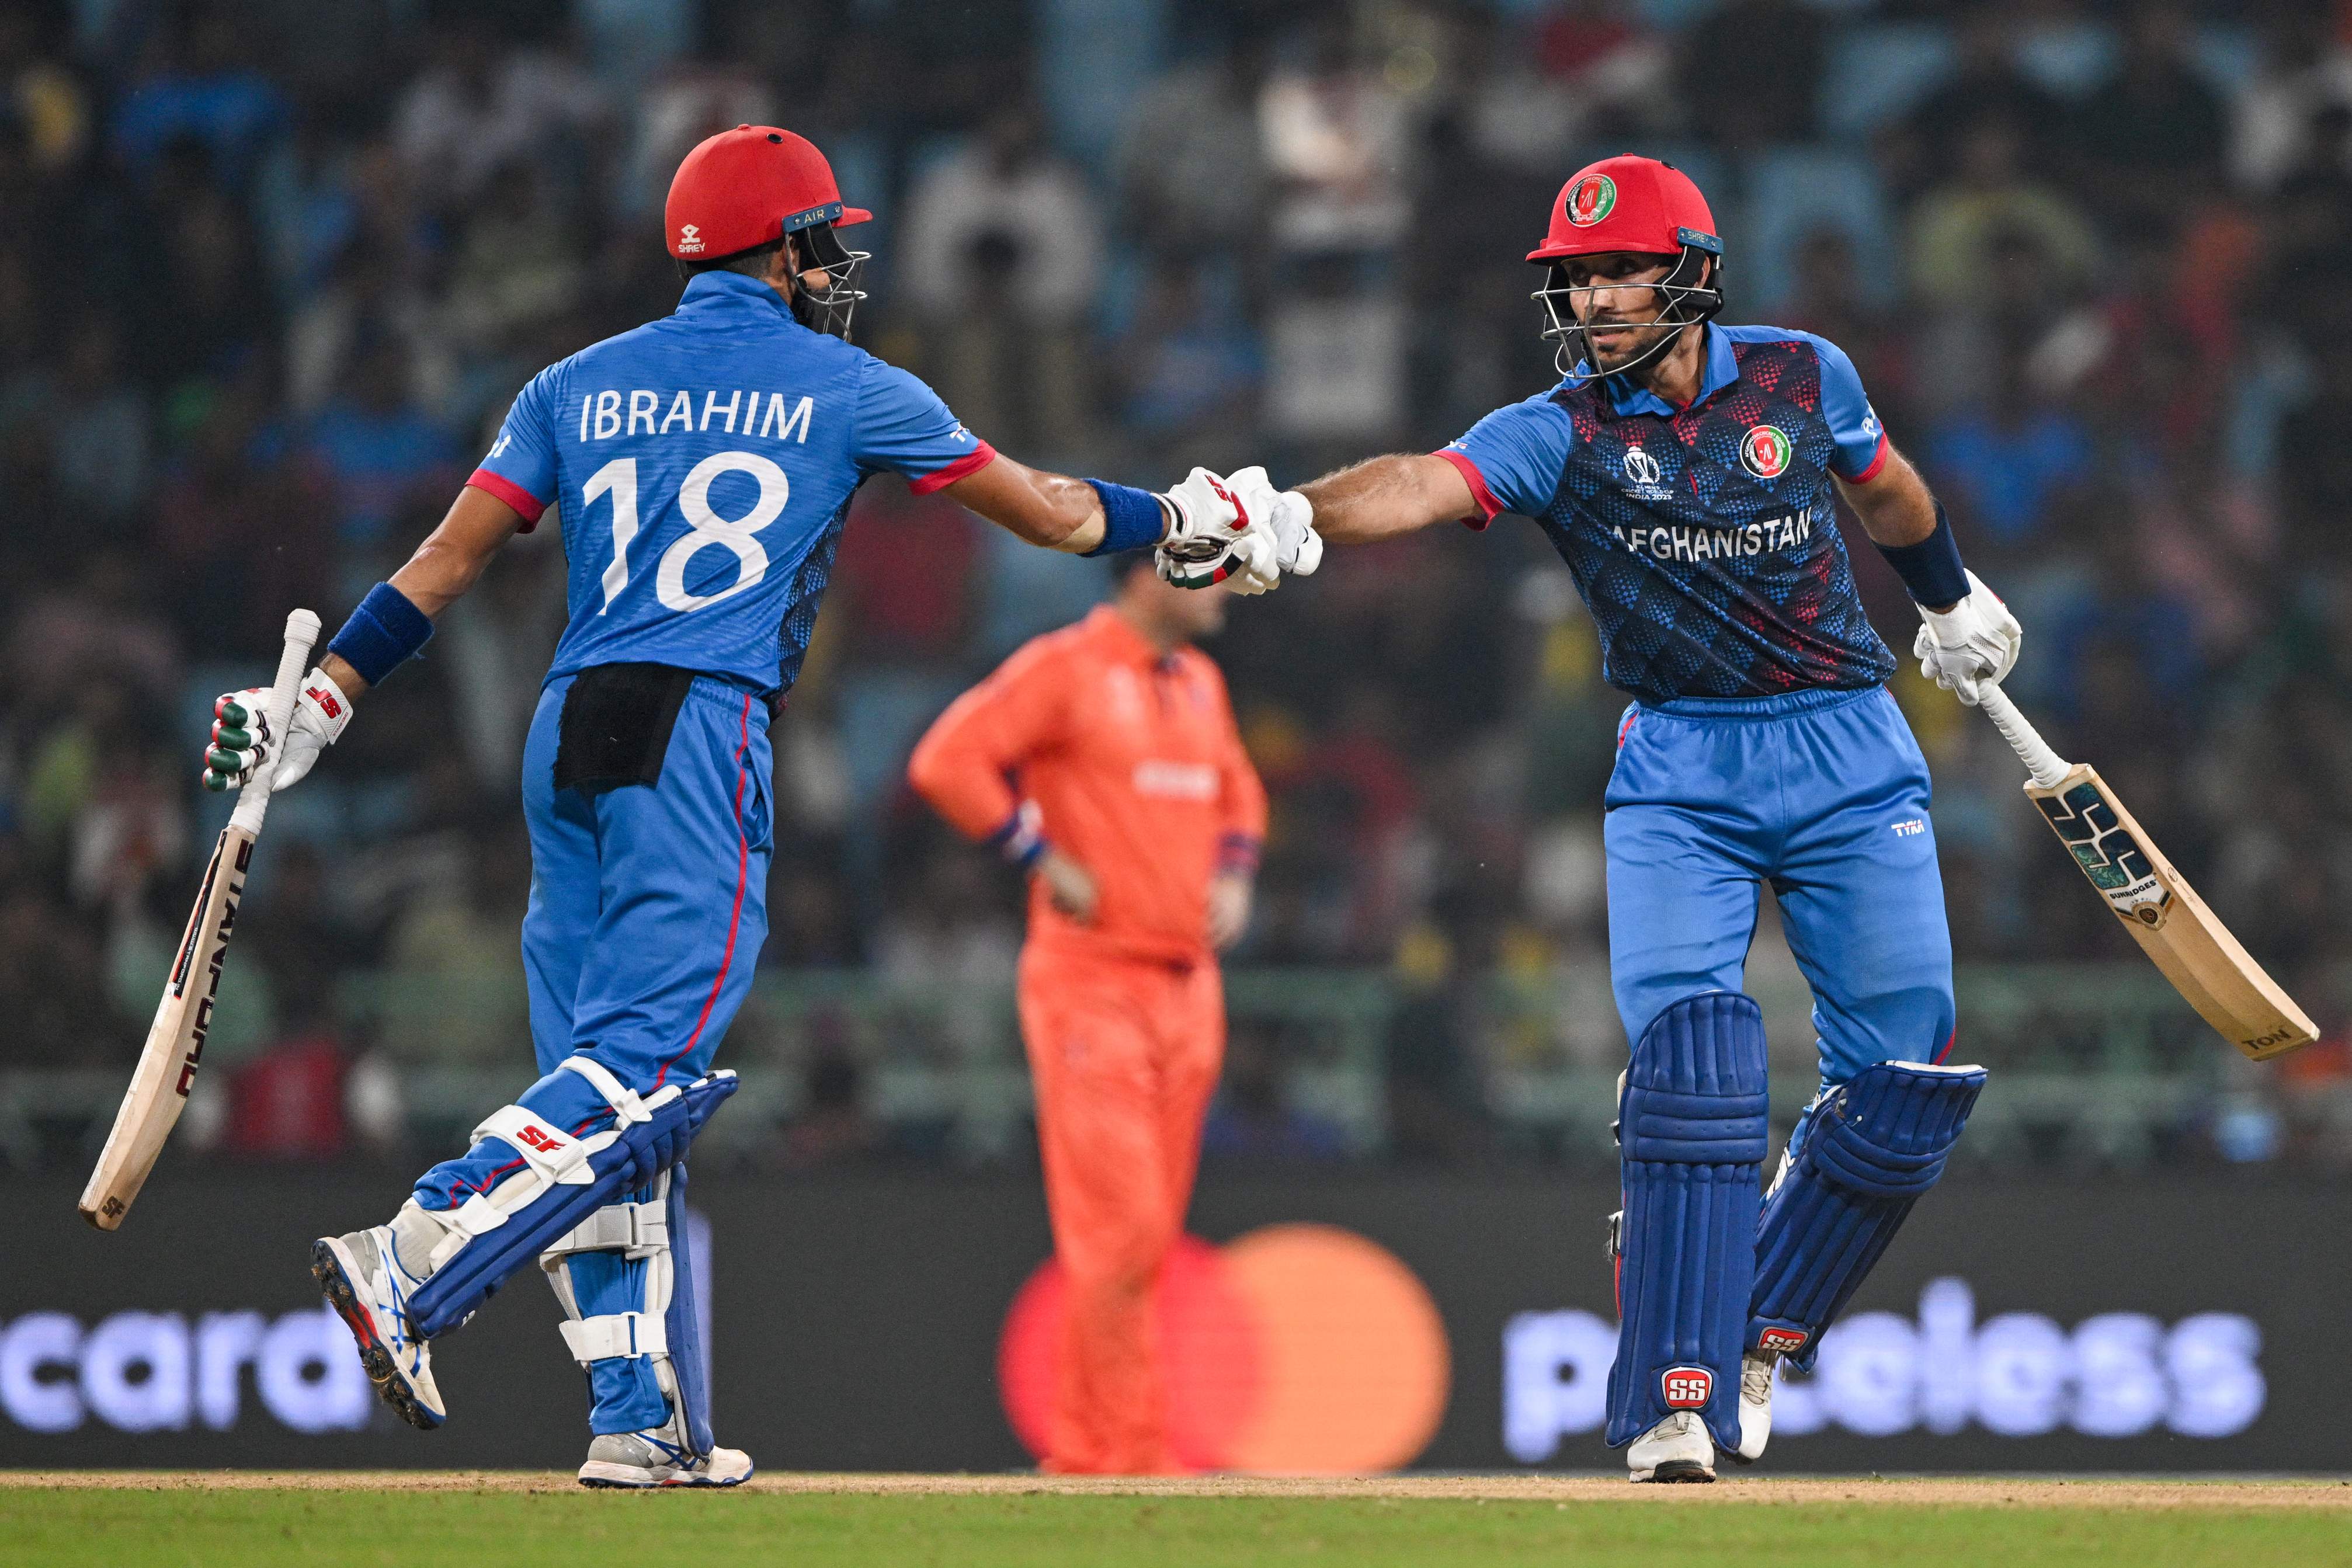 Ibrahim Zadran congratulates Rahmat Shah, who scored 52 off 54 balls to set the platform for Afghanistan’s victory